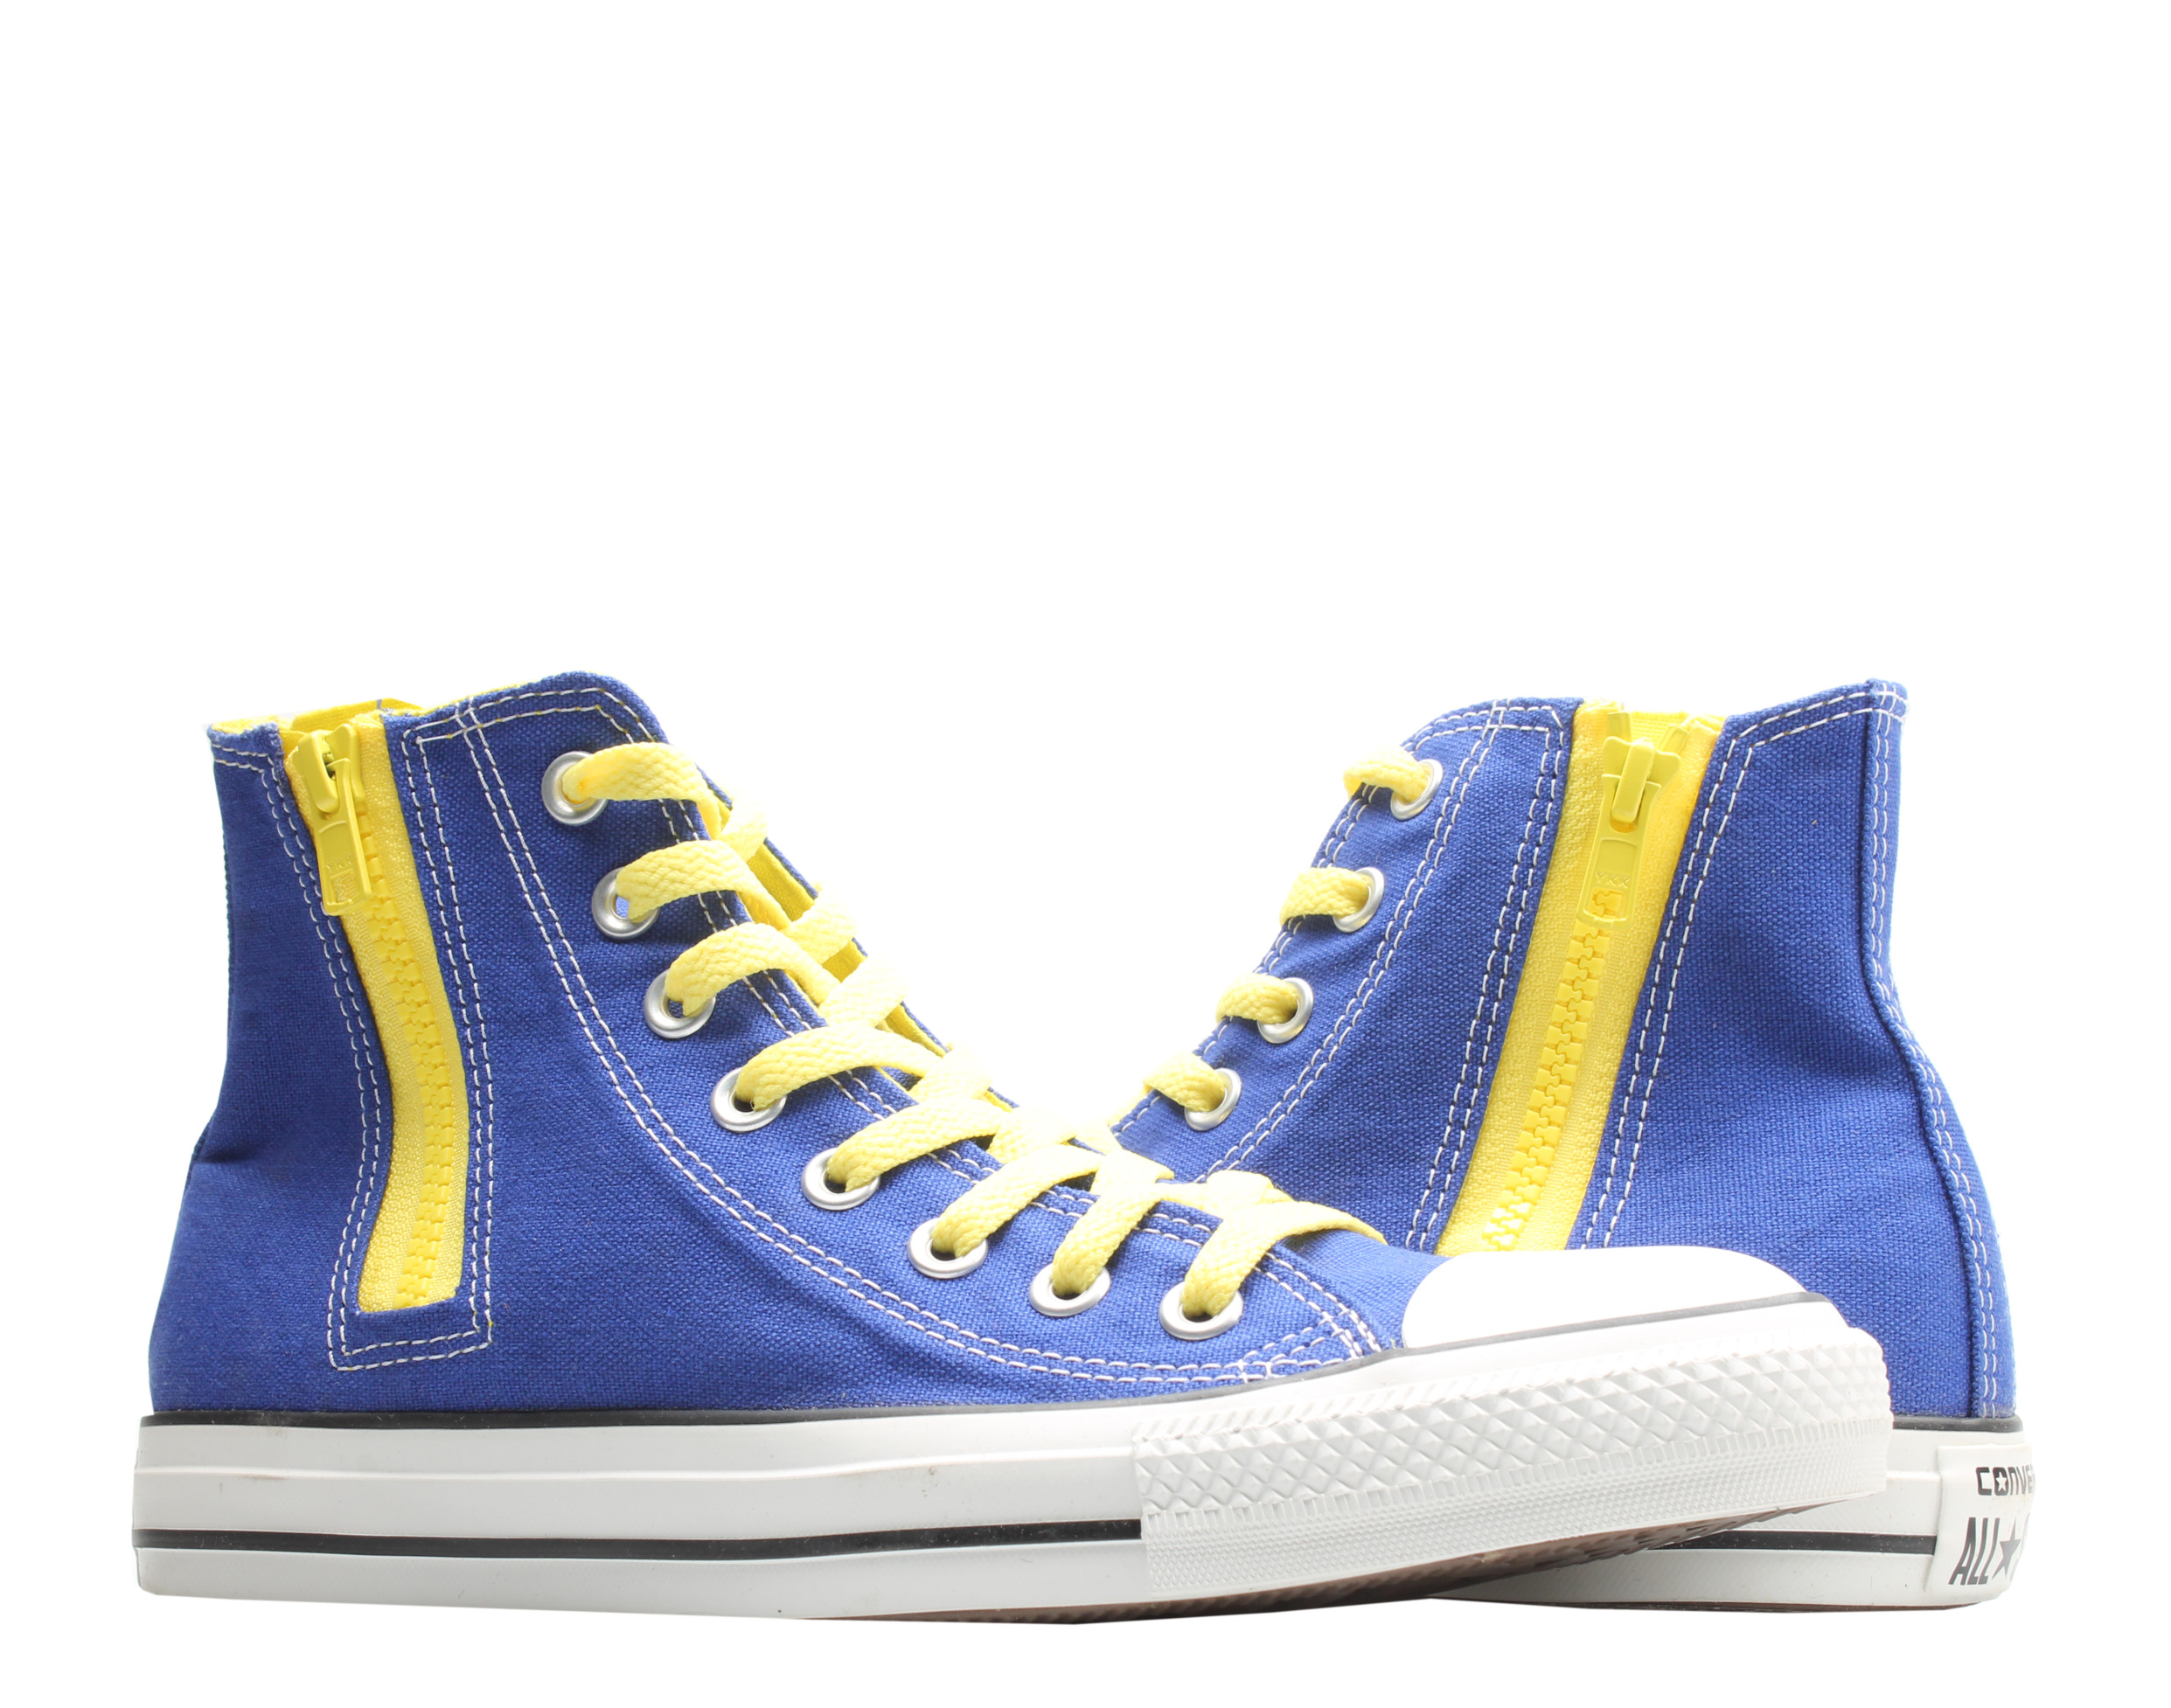 Converse Chuck Taylor All Star Side Zip Radio Blue/Yellow Hi Sneakers  142295C